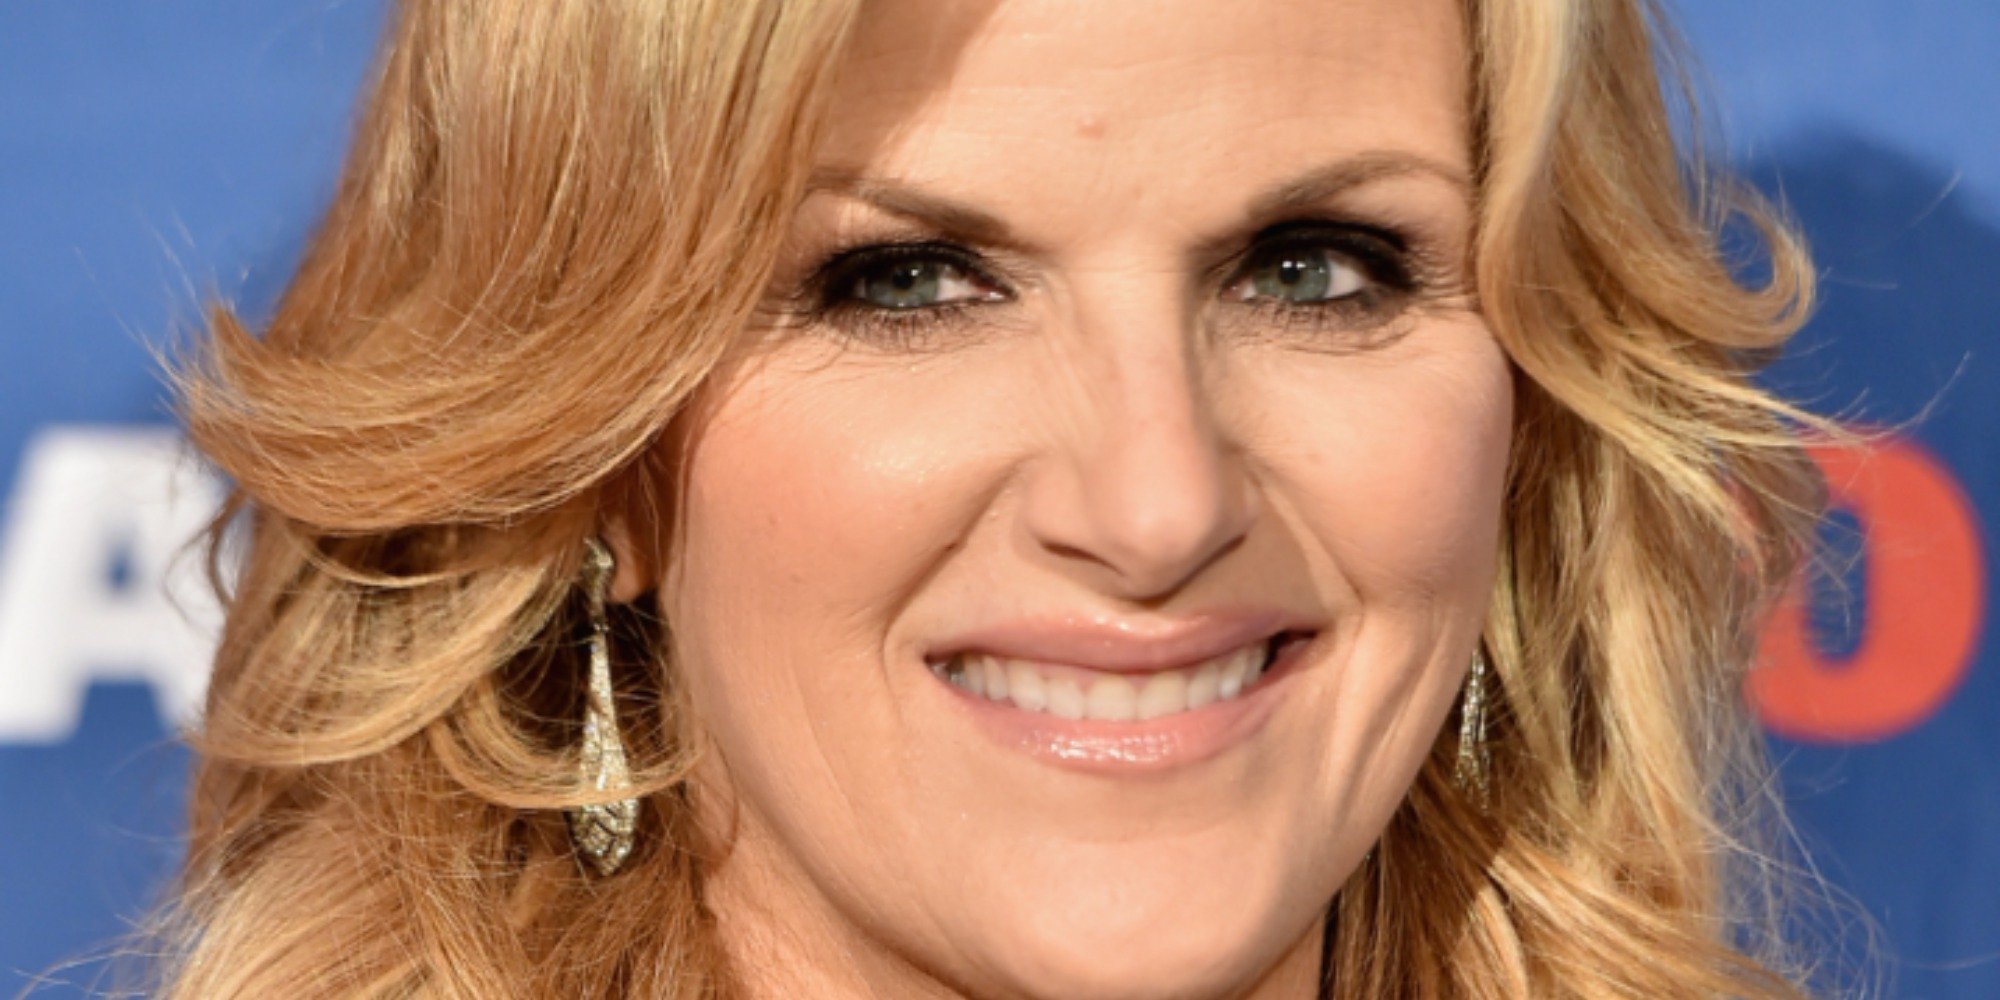 Trisha Yearwood poses on the red carpet at a press event.